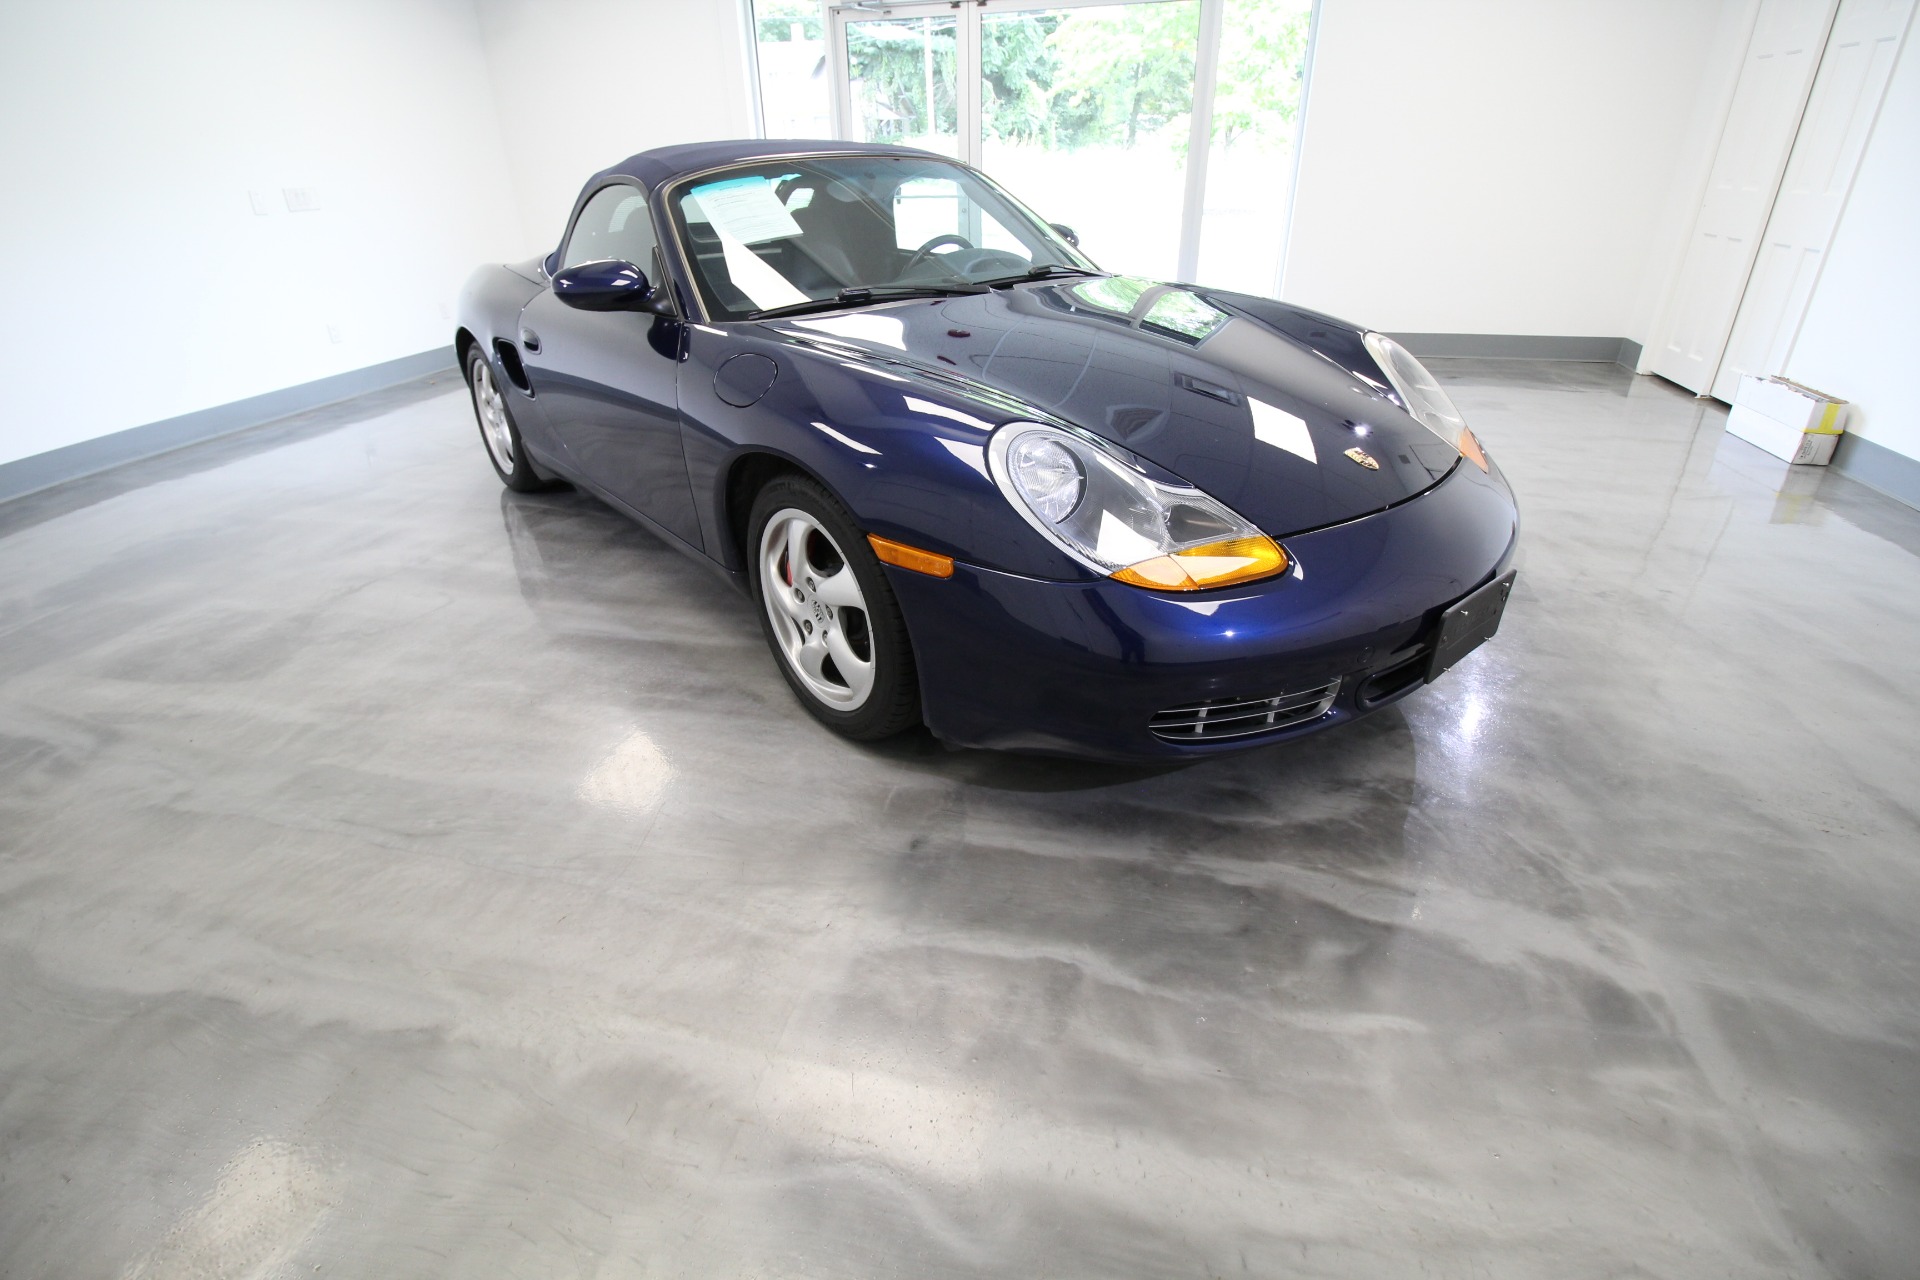 Used 2001 Blue Porsche Boxster S 1 OWNER LOW MILES RARE 6 SPEED MANUAL | Albany, NY